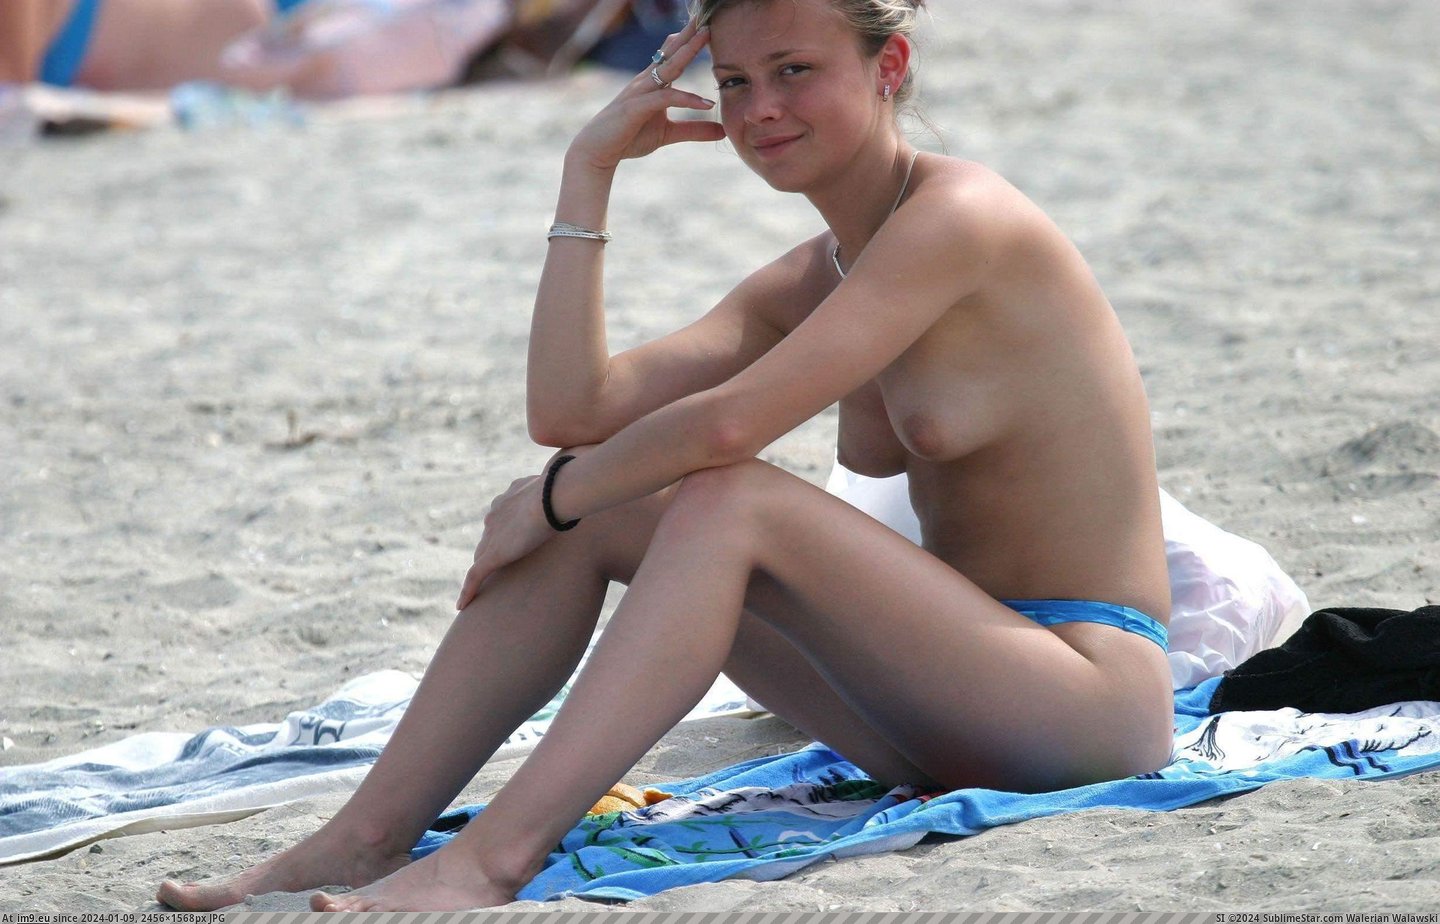 #Teens  #Topless best-of-topless-teens-131-3 Pic. (Изображение из альбом Strictly Topless))